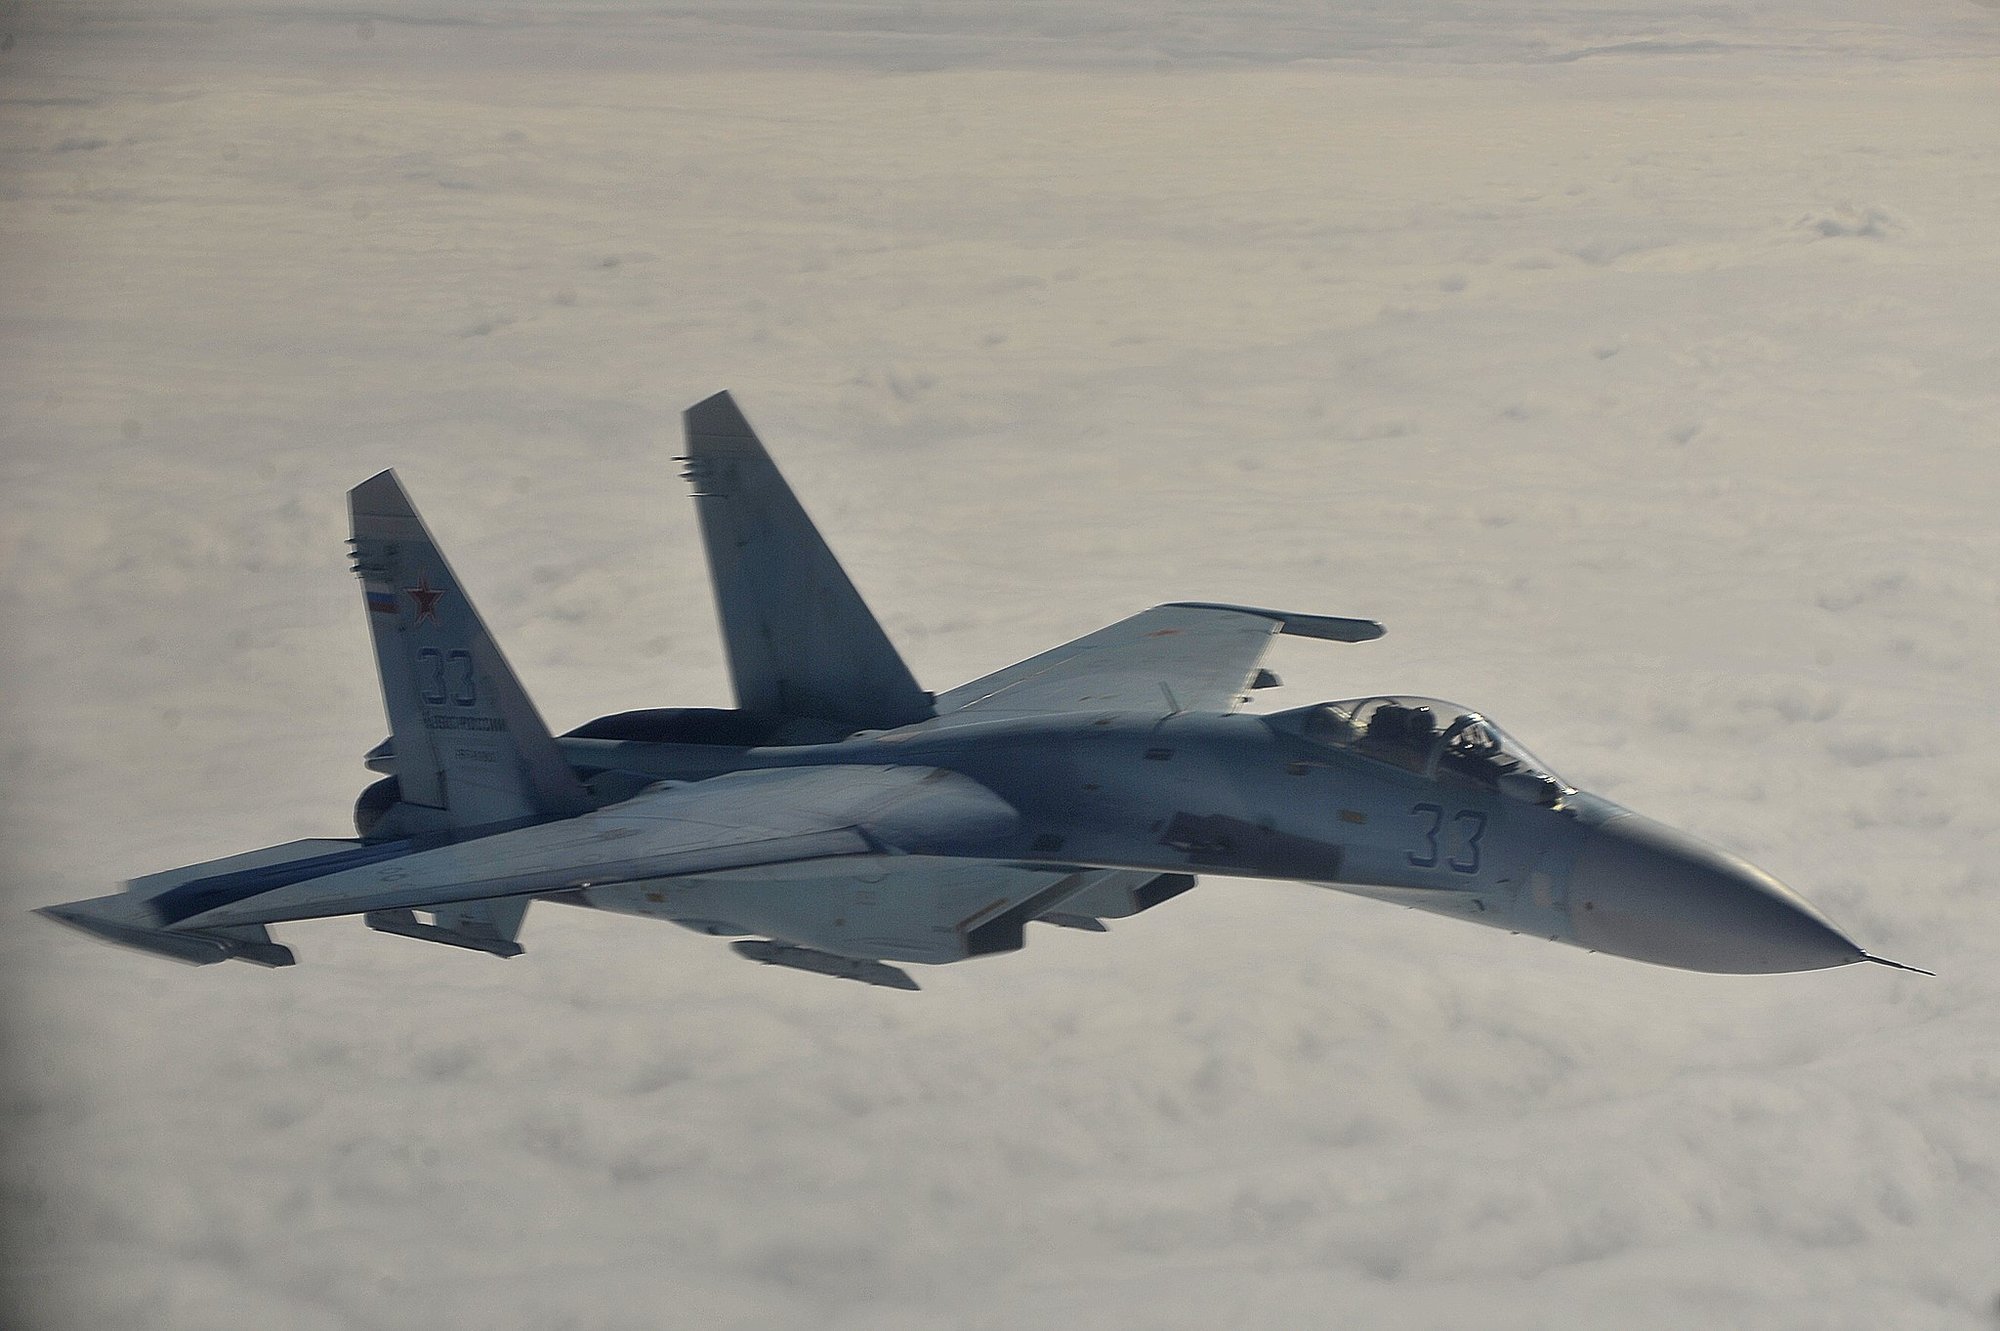 A Russian Federation Air Force Su-27 Sukhoi intercepts a simulated hijacked aircraft entering Russian airspace, Aug. 27, 2013 at Exercise Vigilant Eagle (VE) 13. U.S. Air Force photo by Tech. Sgt. Jason Robertson